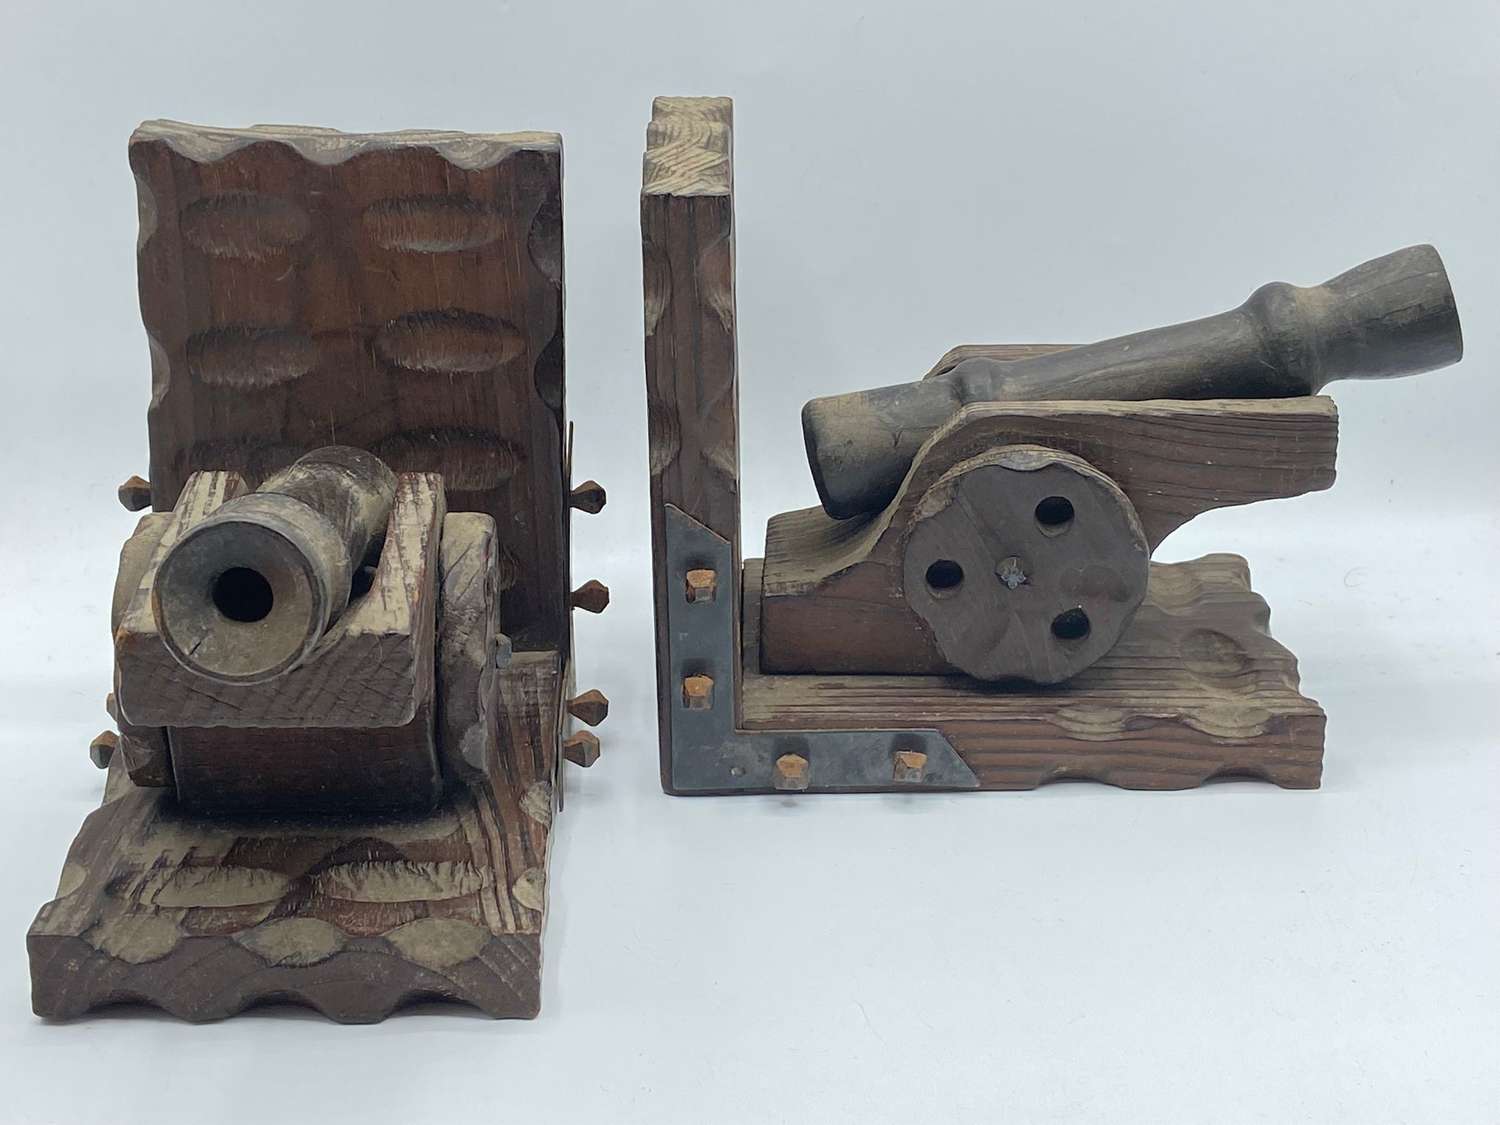 Vintage Hard Wood Carved Rustic Cannon Bookends Perfect For A Man Cave